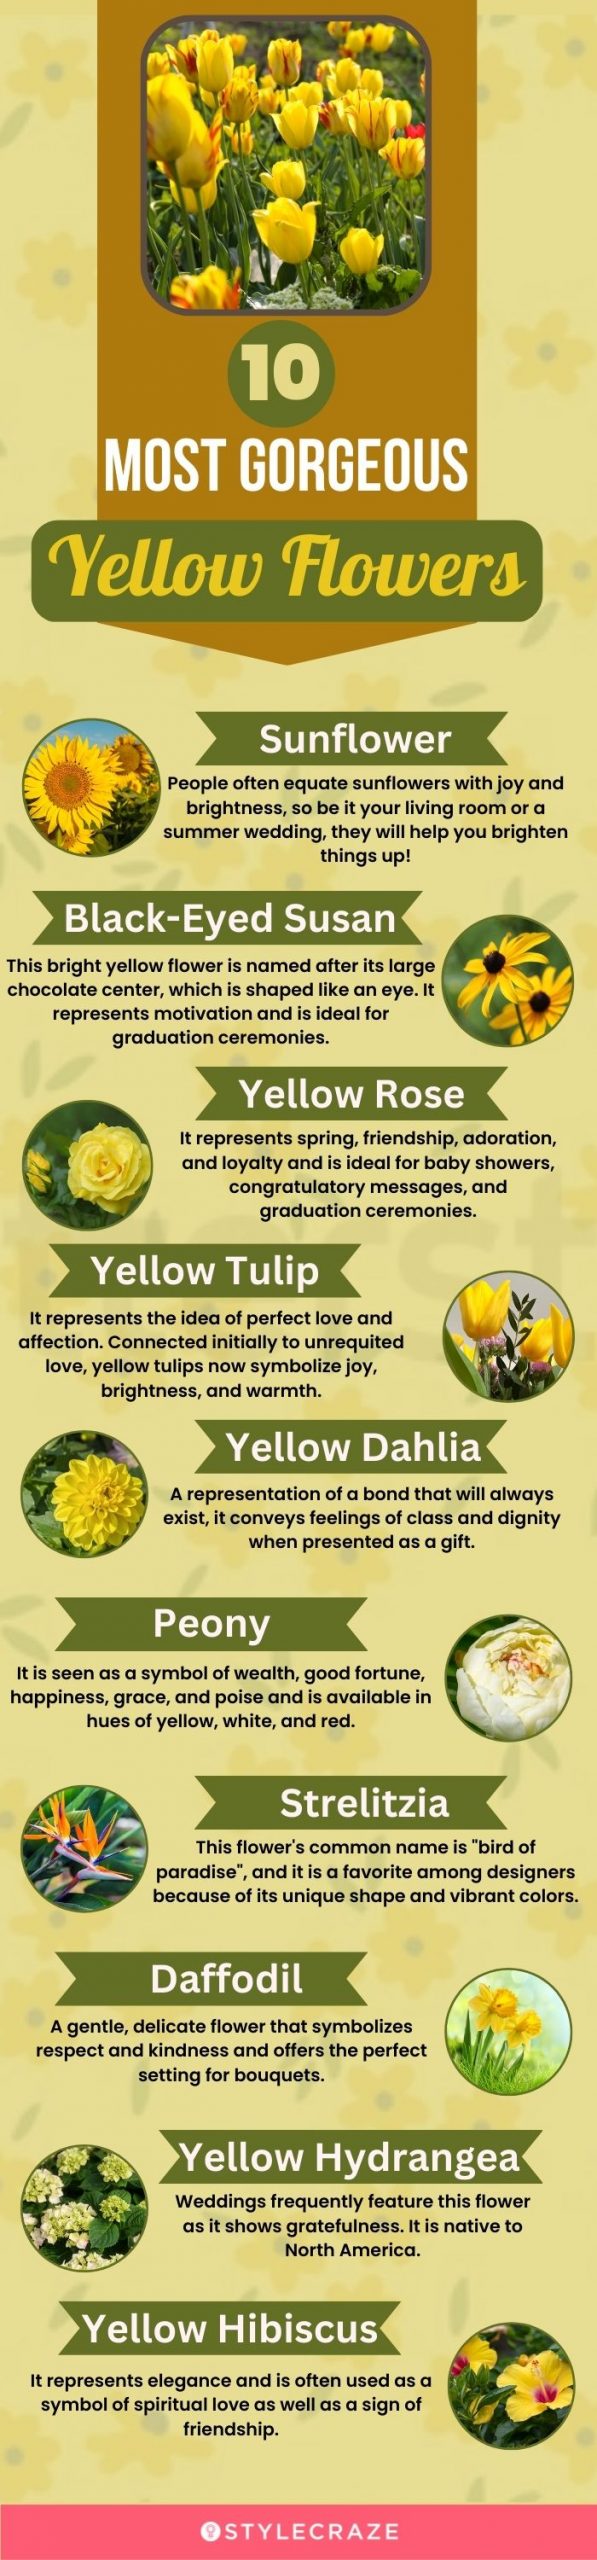 10 most gorgeous yellow flowers (infographic)